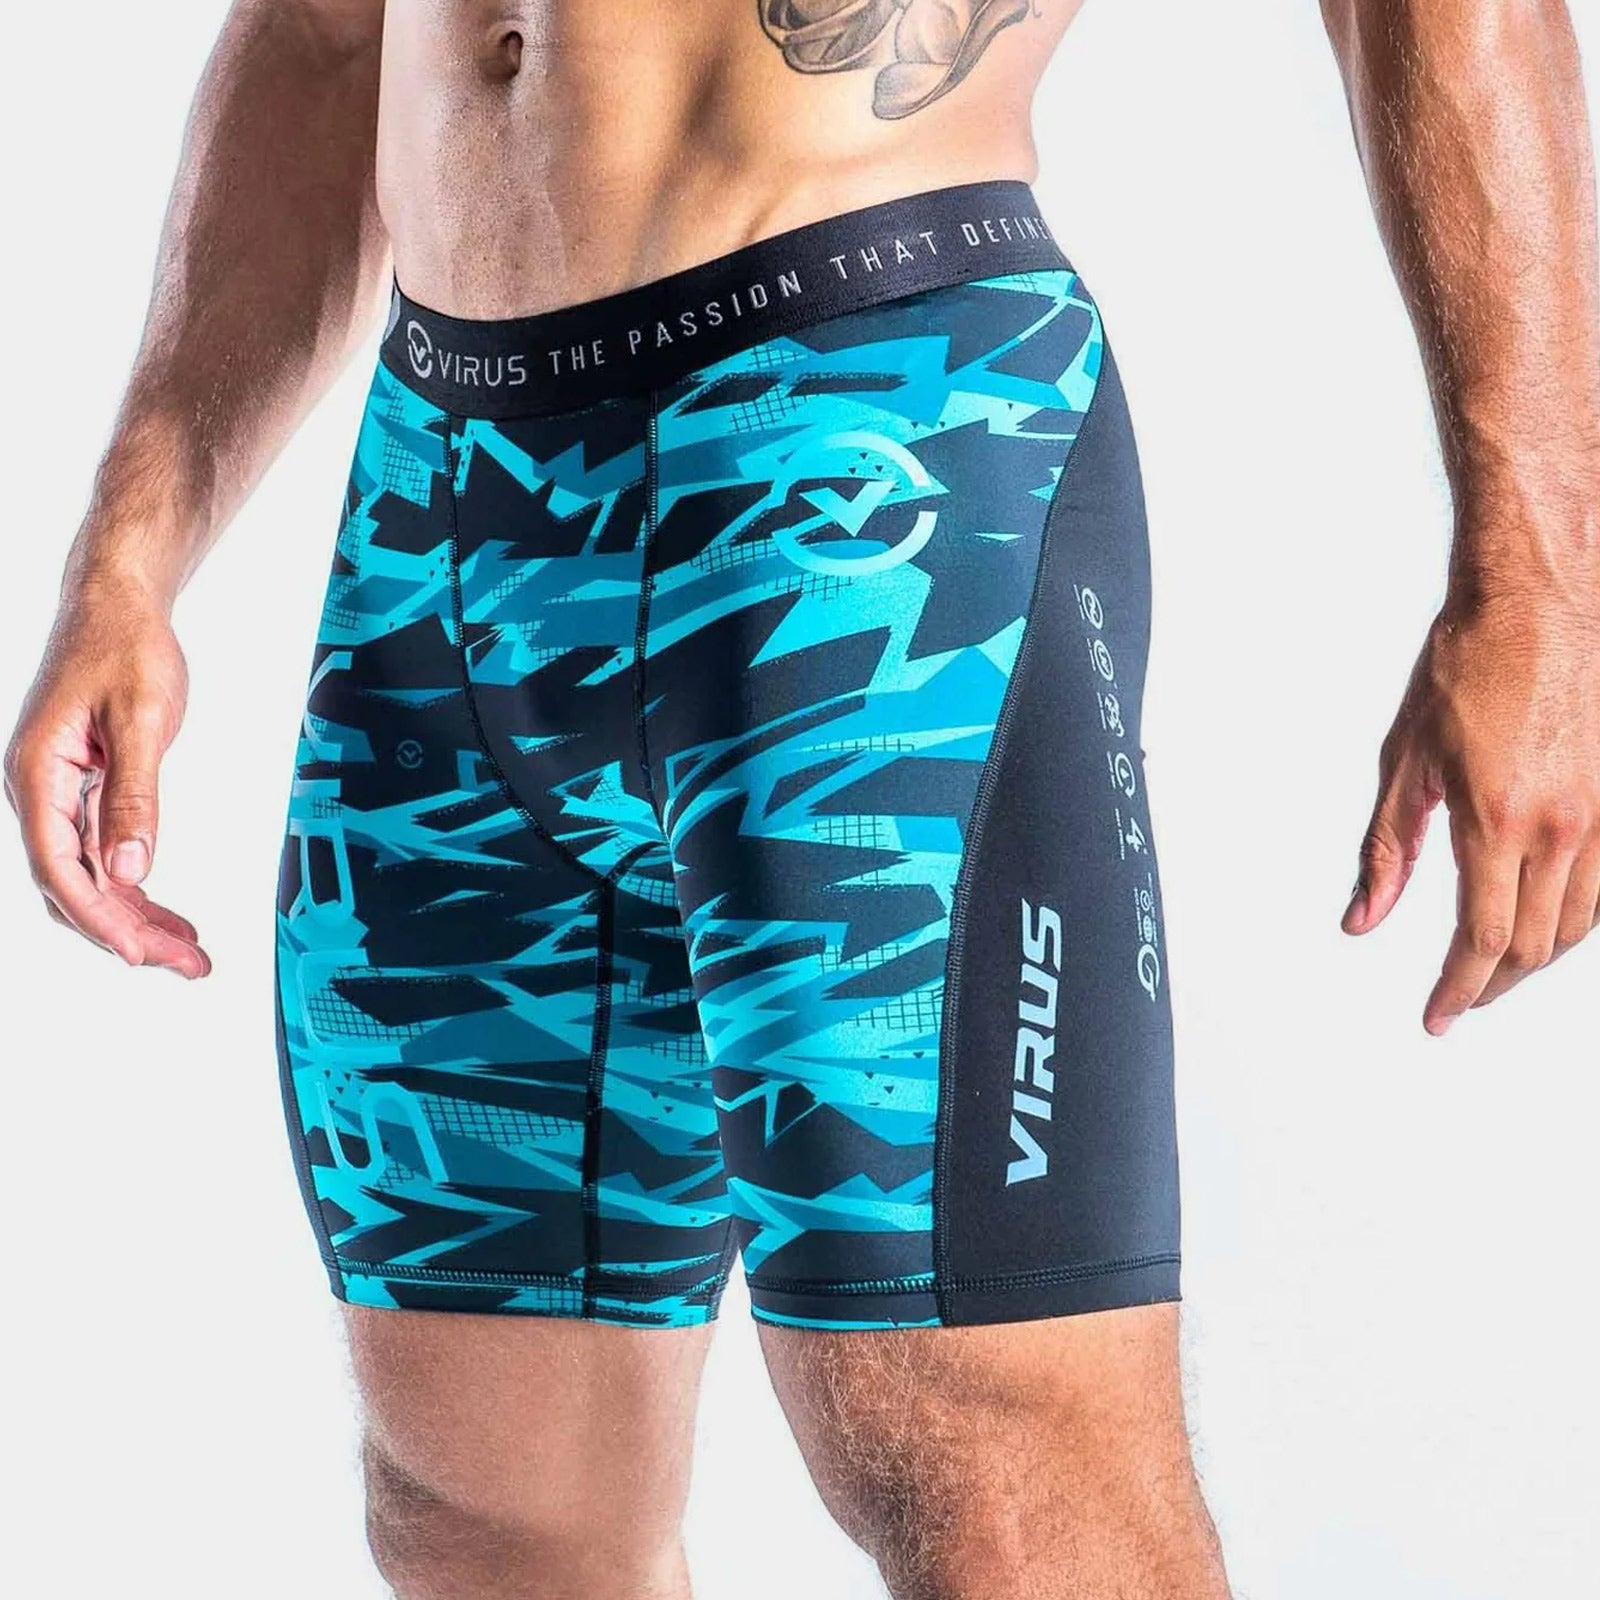 VIRUS - CO14.5 Compression Short – The WOD Life